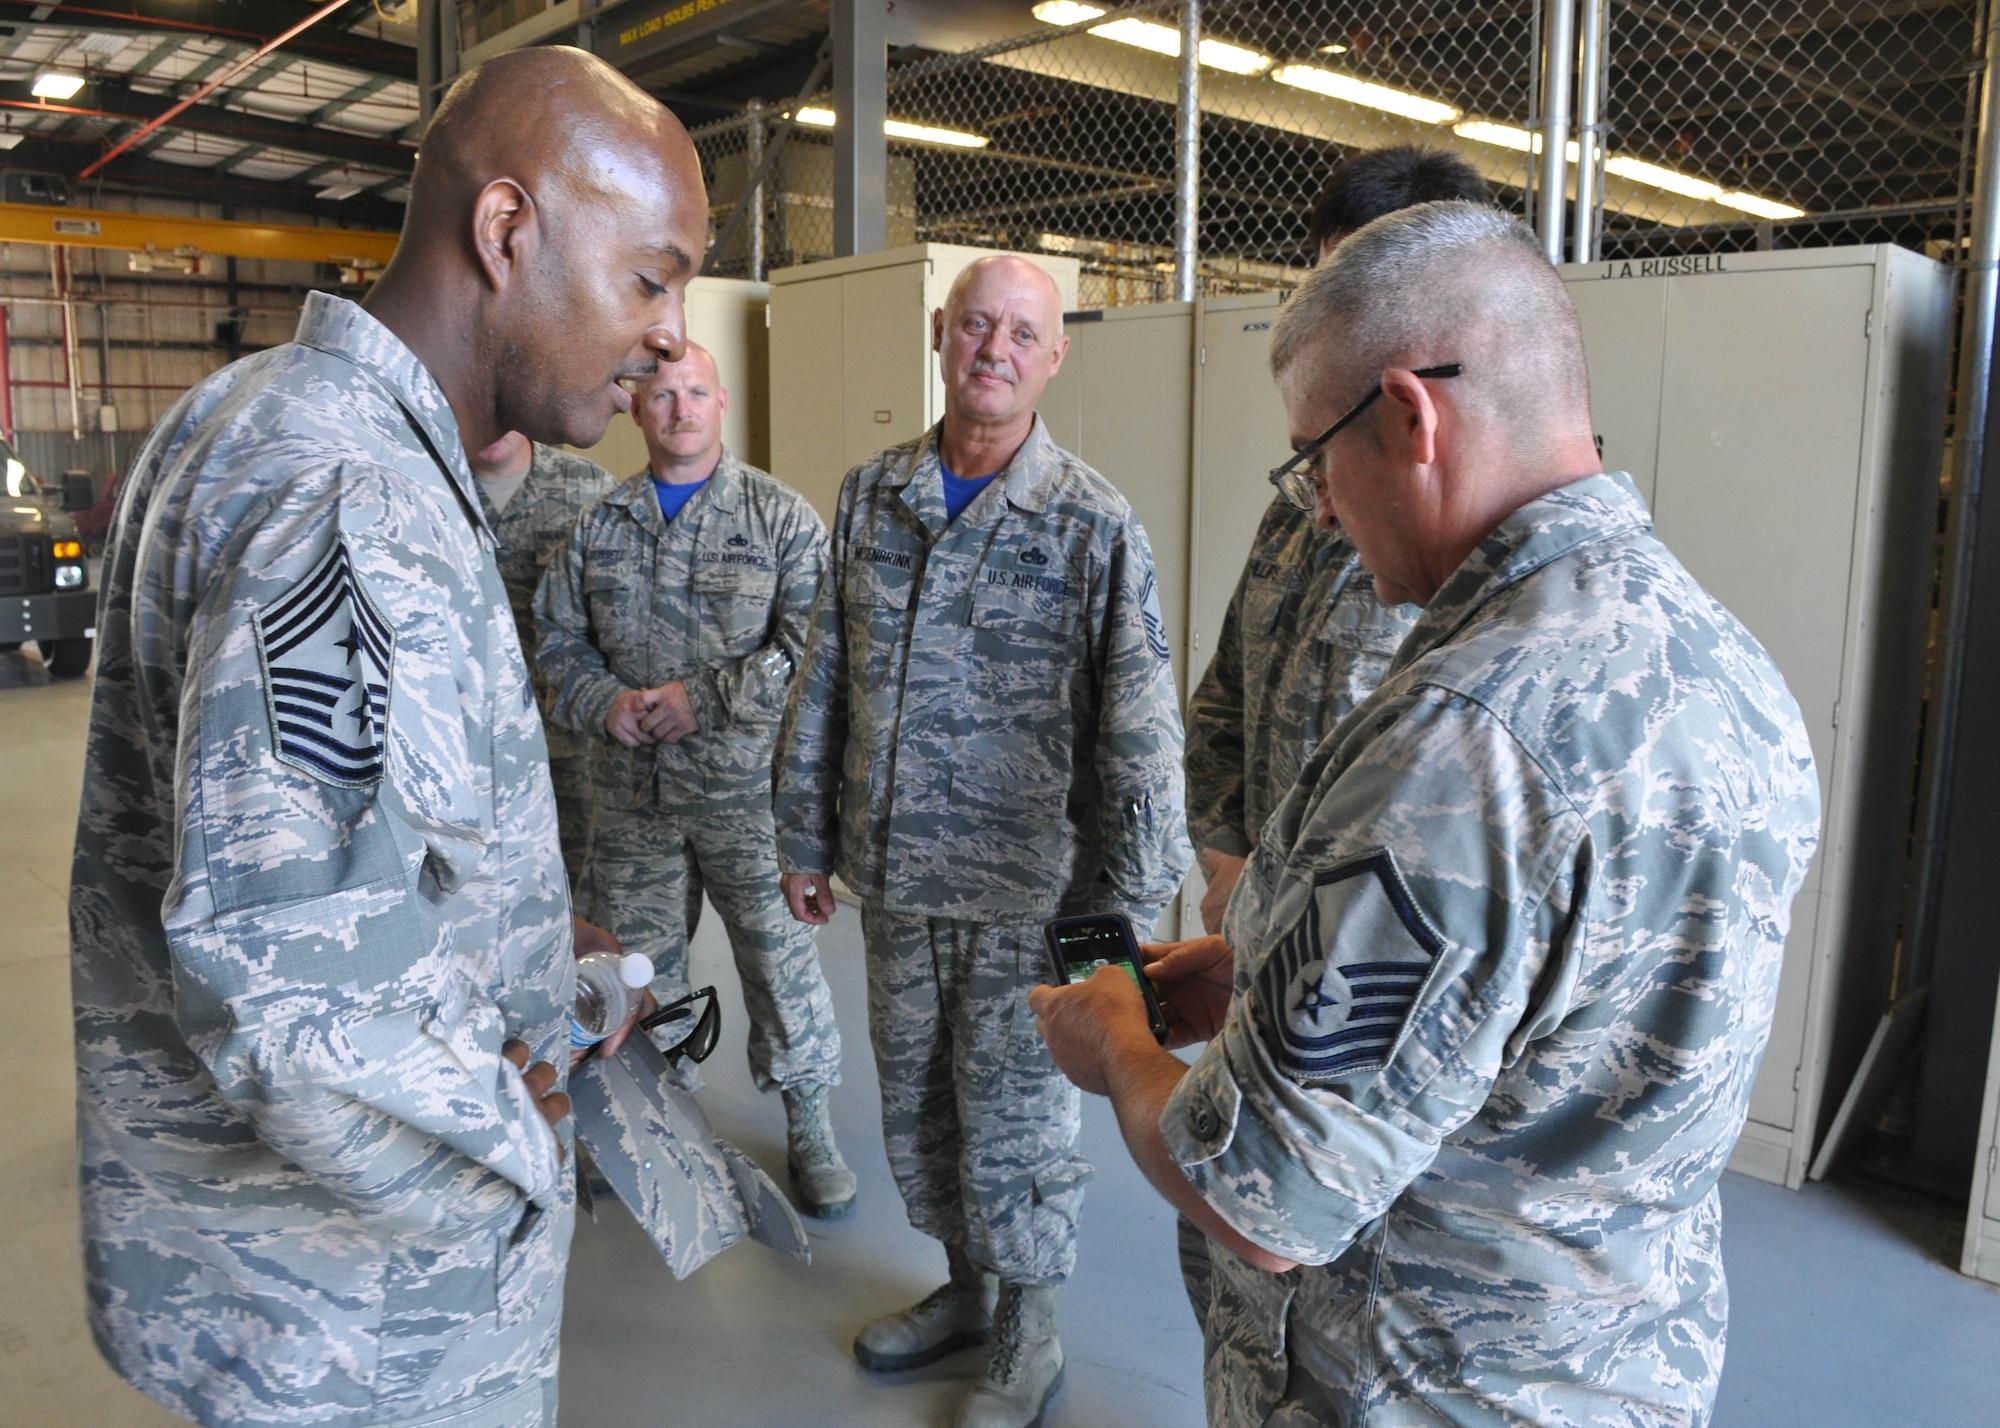 AFRC Command Chief Cameron B. Kirksey checks out photos with Master Sgt. David L. Wallis, an engine mechanic with the 507th Aircraft Maintenance Squadron during a three-day tour of the 507th Air Refueling Wing August 9, 2015, at Tinker Air Force Base, Okla. Kirksey has visited more than 20 Reserve units during his tenure as command chief. (U.S. Air Force photo by Staff Sgt. Lauren Gleason)




